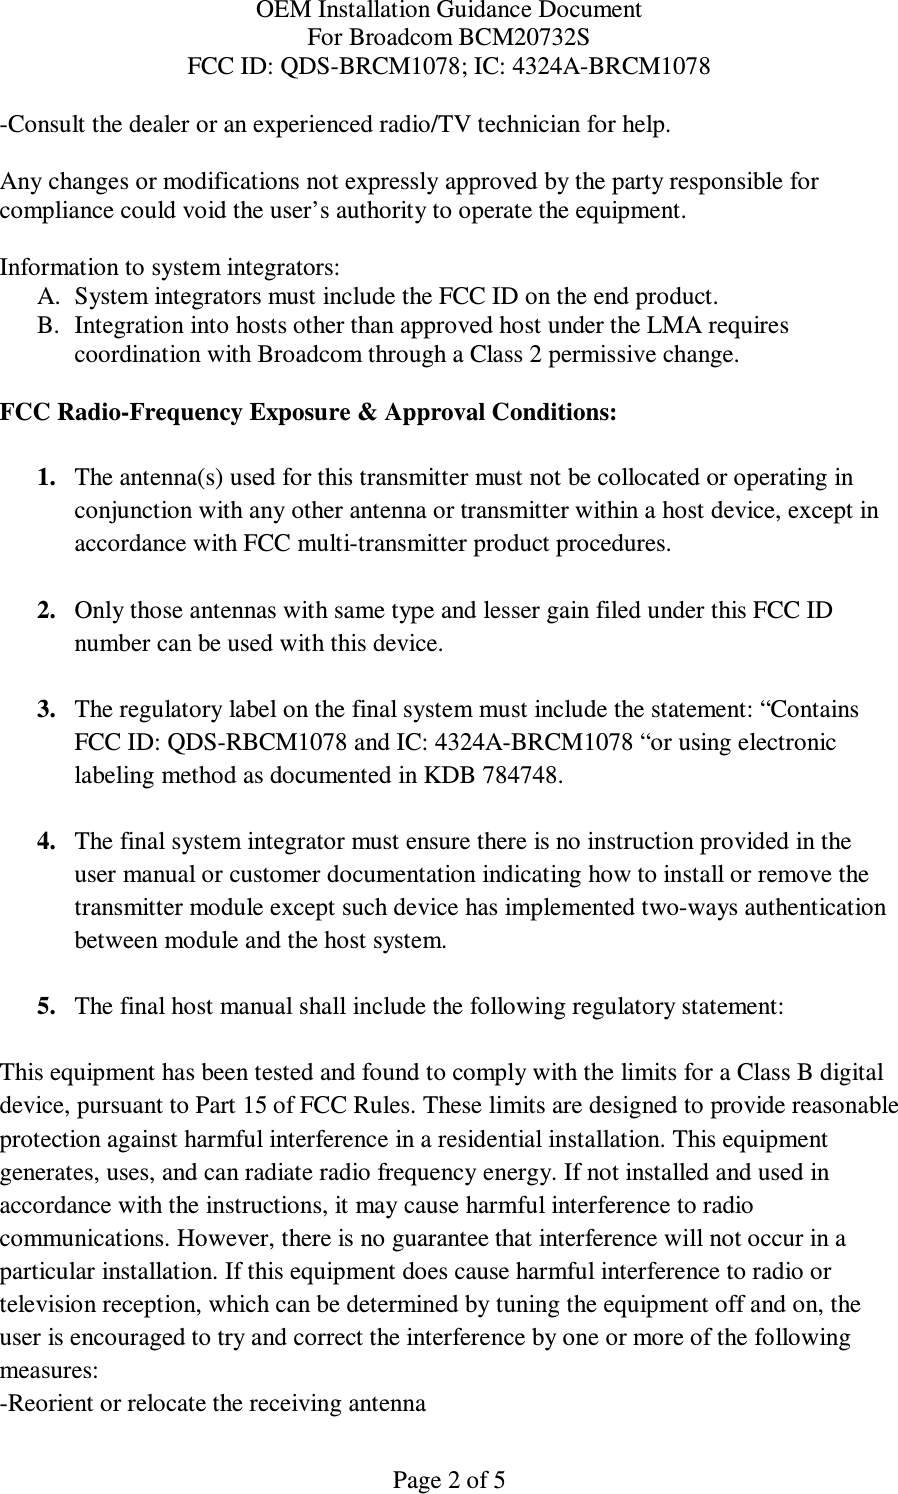 OEM Installation Guidance Document For Broadcom BCM20732S FCC ID: QDS-BRCM1078; IC: 4324A-BRCM1078  Page 2 of 5 -Consult the dealer or an experienced radio/TV technician for help.  Any changes or modifications not expressly approved by the party responsible for compliance could void the user’s authority to operate the equipment.  Information to system integrators:  A. System integrators must include the FCC ID on the end product.  B. Integration into hosts other than approved host under the LMA requires  coordination with Broadcom through a Class 2 permissive change.   FCC Radio-Frequency Exposure &amp; Approval Conditions:  1. The antenna(s) used for this transmitter must not be collocated or operating in conjunction with any other antenna or transmitter within a host device, except in accordance with FCC multi-transmitter product procedures.  2. Only those antennas with same type and lesser gain filed under this FCC ID number can be used with this device.  3. The regulatory label on the final system must include the statement: “Contains FCC ID: QDS-RBCM1078 and IC: 4324A-BRCM1078 “or using electronic labeling method as documented in KDB 784748.  4. The final system integrator must ensure there is no instruction provided in the user manual or customer documentation indicating how to install or remove the transmitter module except such device has implemented two-ways authentication between module and the host system.  5. The final host manual shall include the following regulatory statement:  This equipment has been tested and found to comply with the limits for a Class B digital device, pursuant to Part 15 of FCC Rules. These limits are designed to provide reasonable protection against harmful interference in a residential installation. This equipment generates, uses, and can radiate radio frequency energy. If not installed and used in accordance with the instructions, it may cause harmful interference to radio communications. However, there is no guarantee that interference will not occur in a particular installation. If this equipment does cause harmful interference to radio or television reception, which can be determined by tuning the equipment off and on, the user is encouraged to try and correct the interference by one or more of the following measures: -Reorient or relocate the receiving antenna 